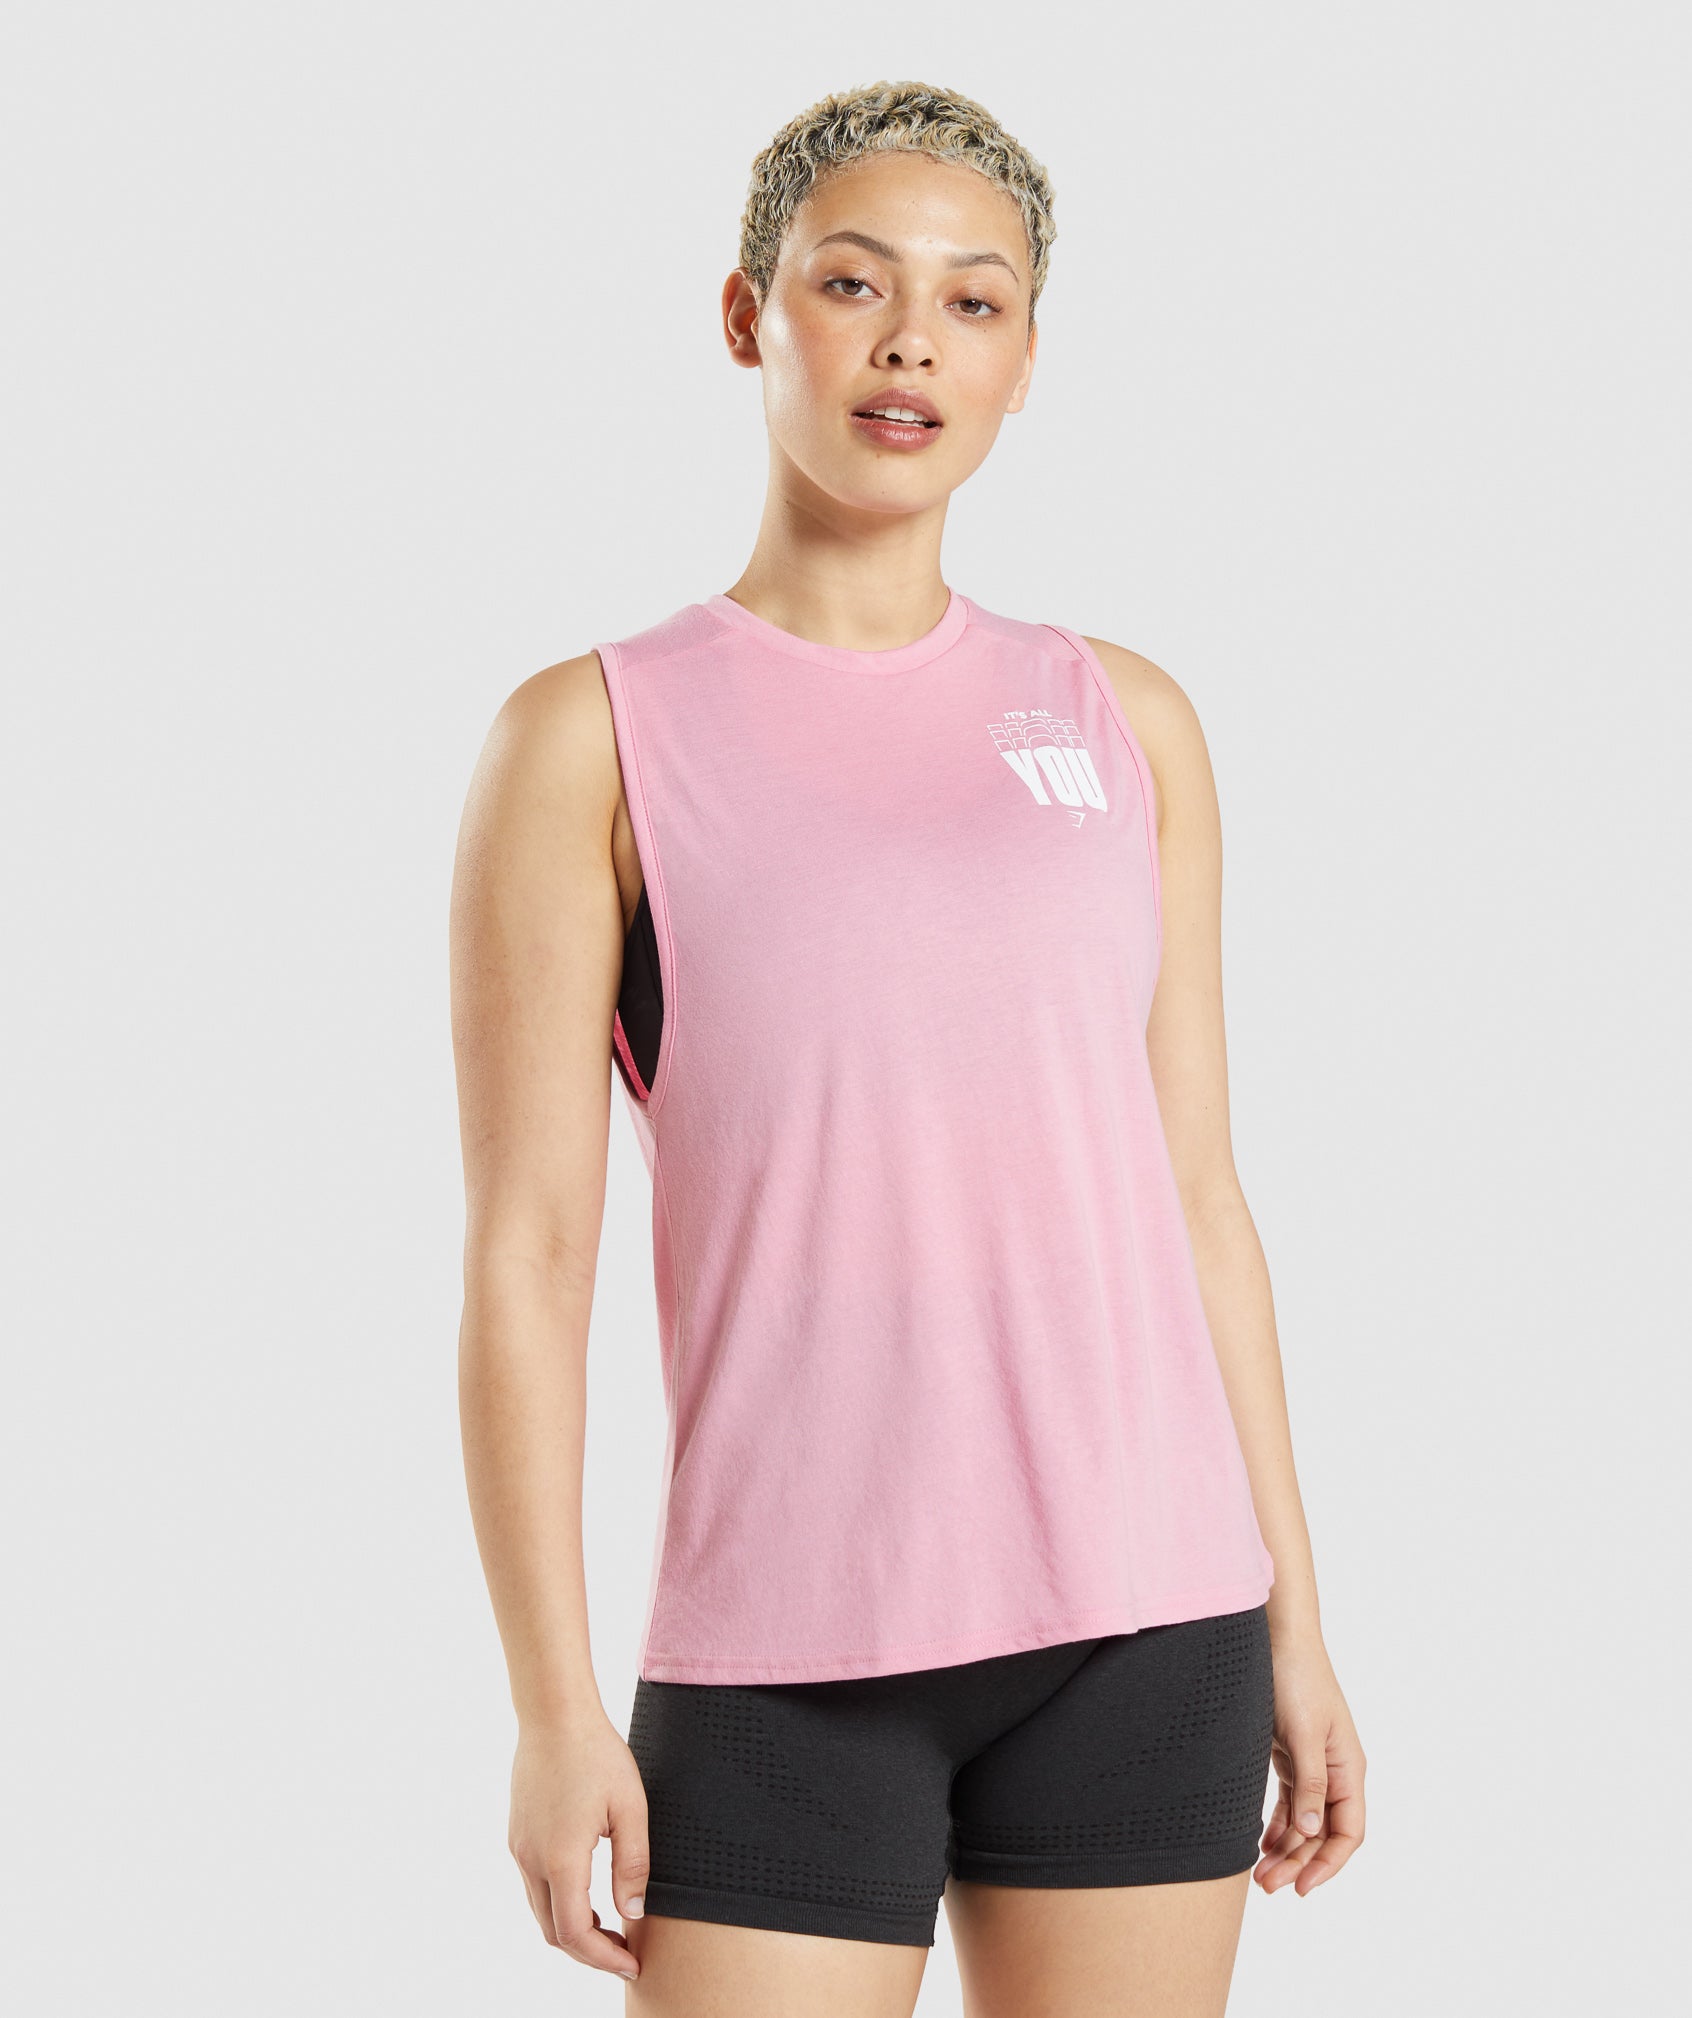 Its All You Drop Arm Tank in Sorbet Pink - view 1